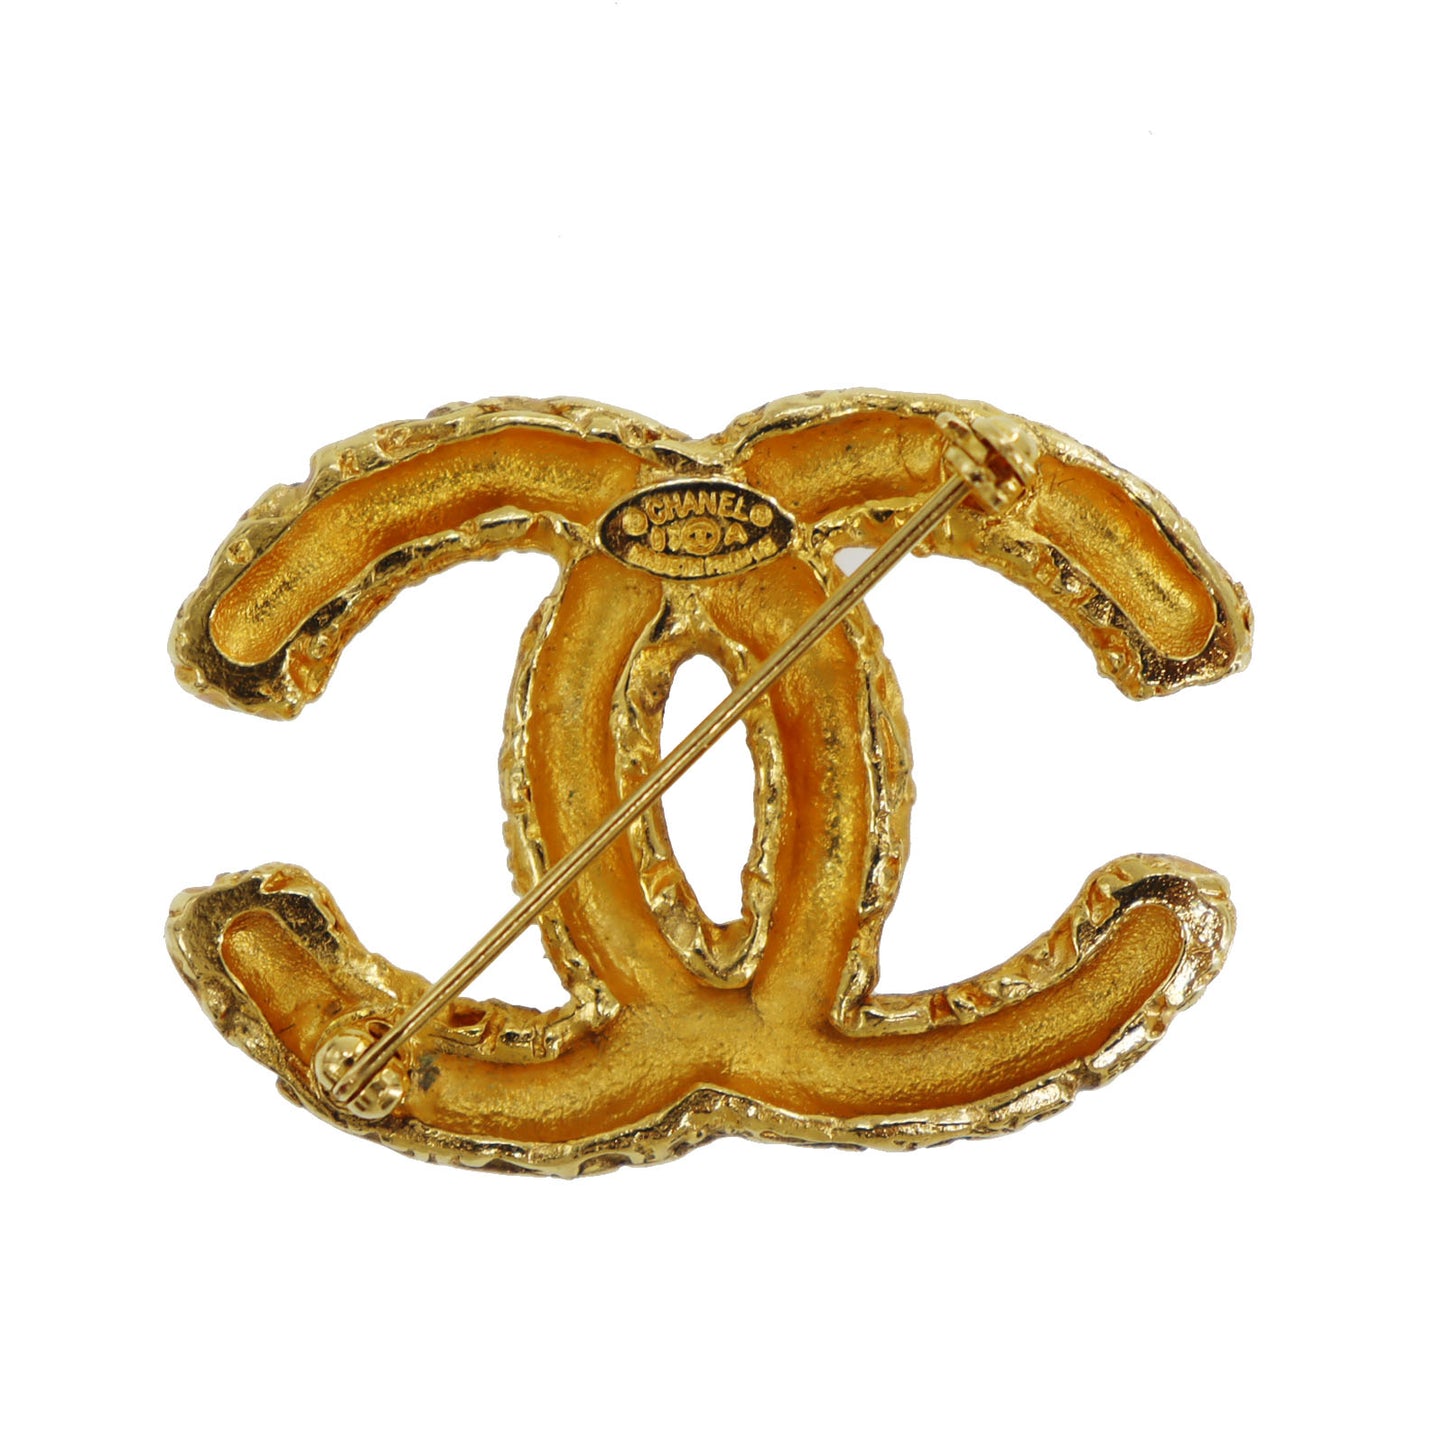 CHANEL CC Logos Pin Brooch Gold Plated 93A #CN507